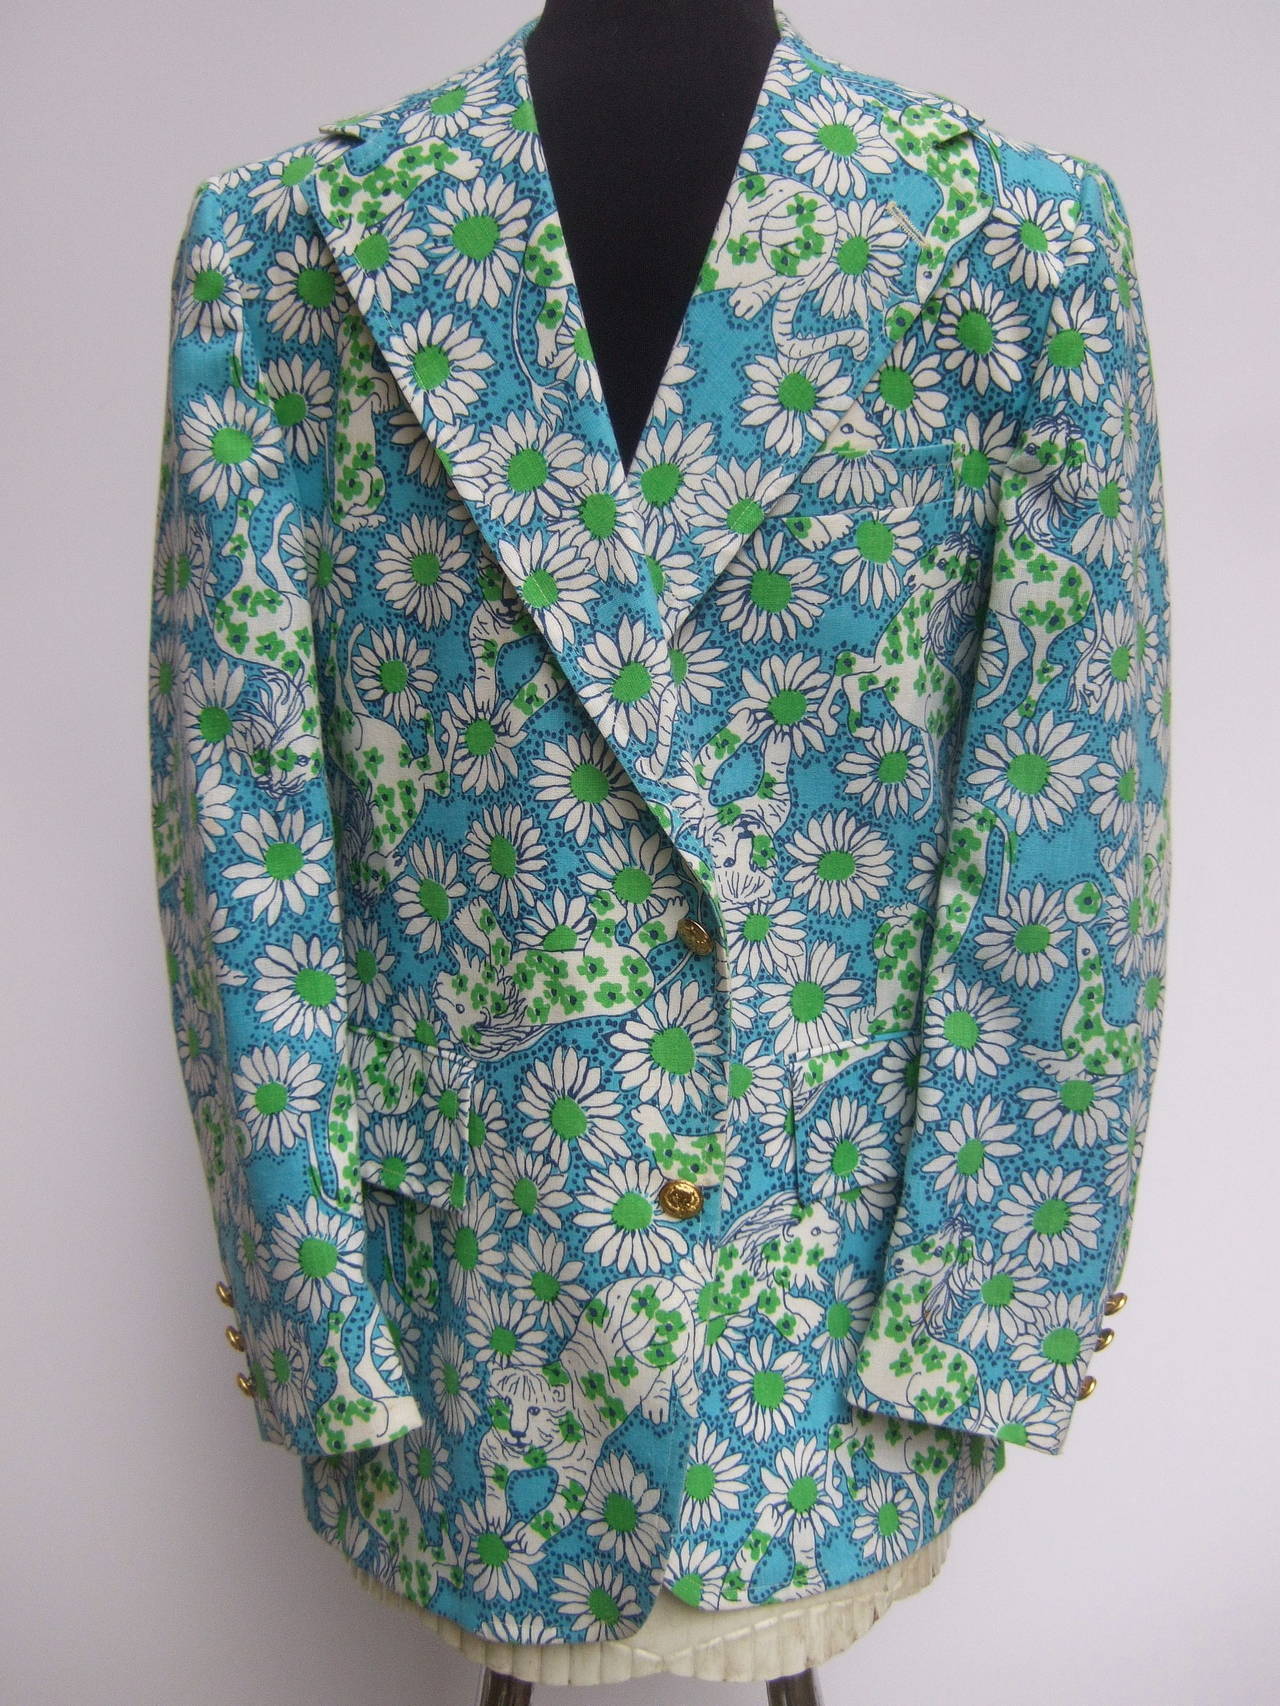 Lilly Pulitzer Men's Whimsical Jungle Print Jacket c 1970s Size 41 4